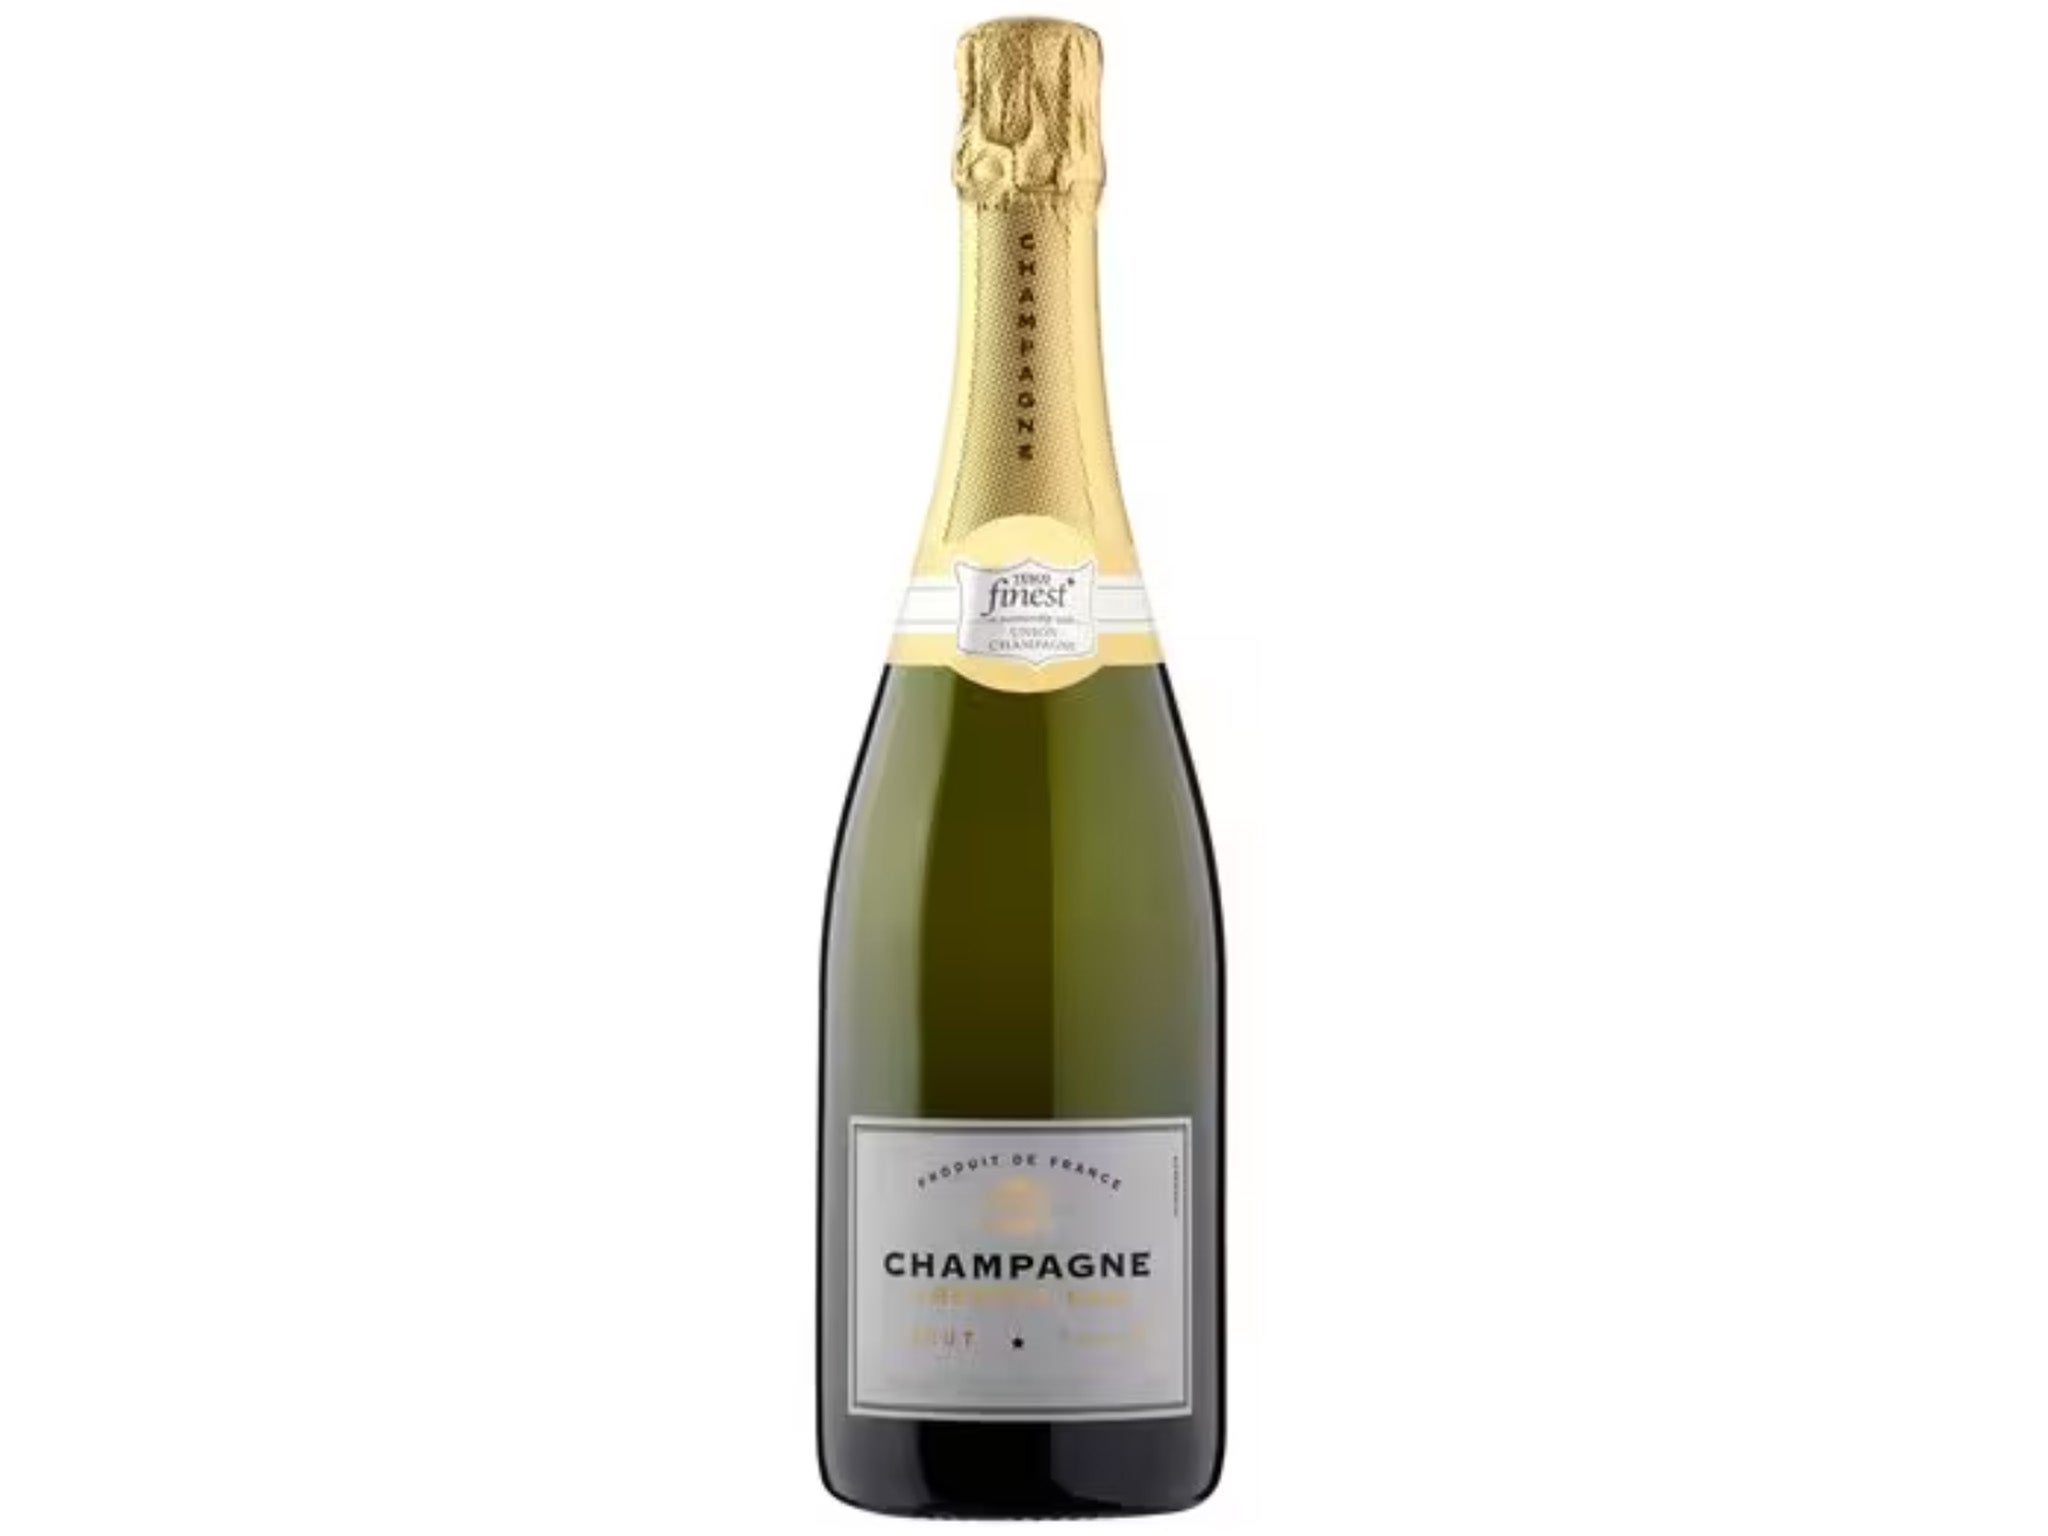 Tesco-indybest-champagne-reivew